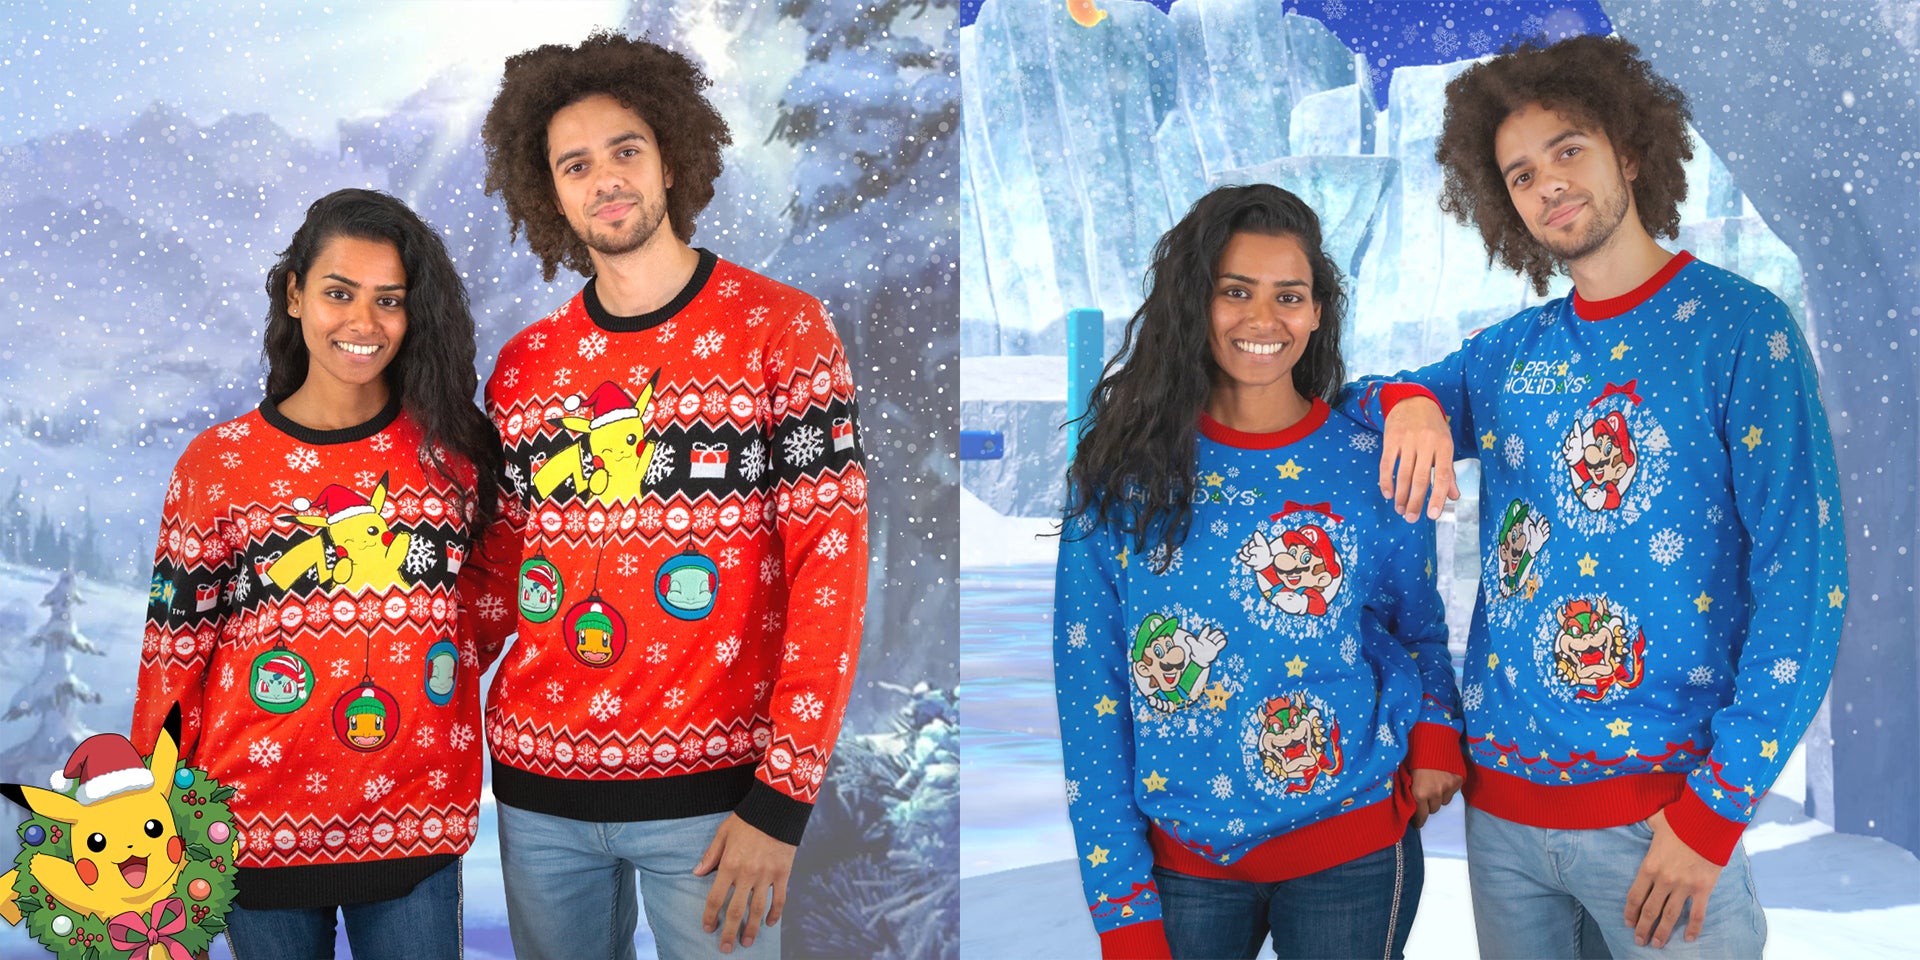 These Are Nintendo’s Official Christmas Sweaters